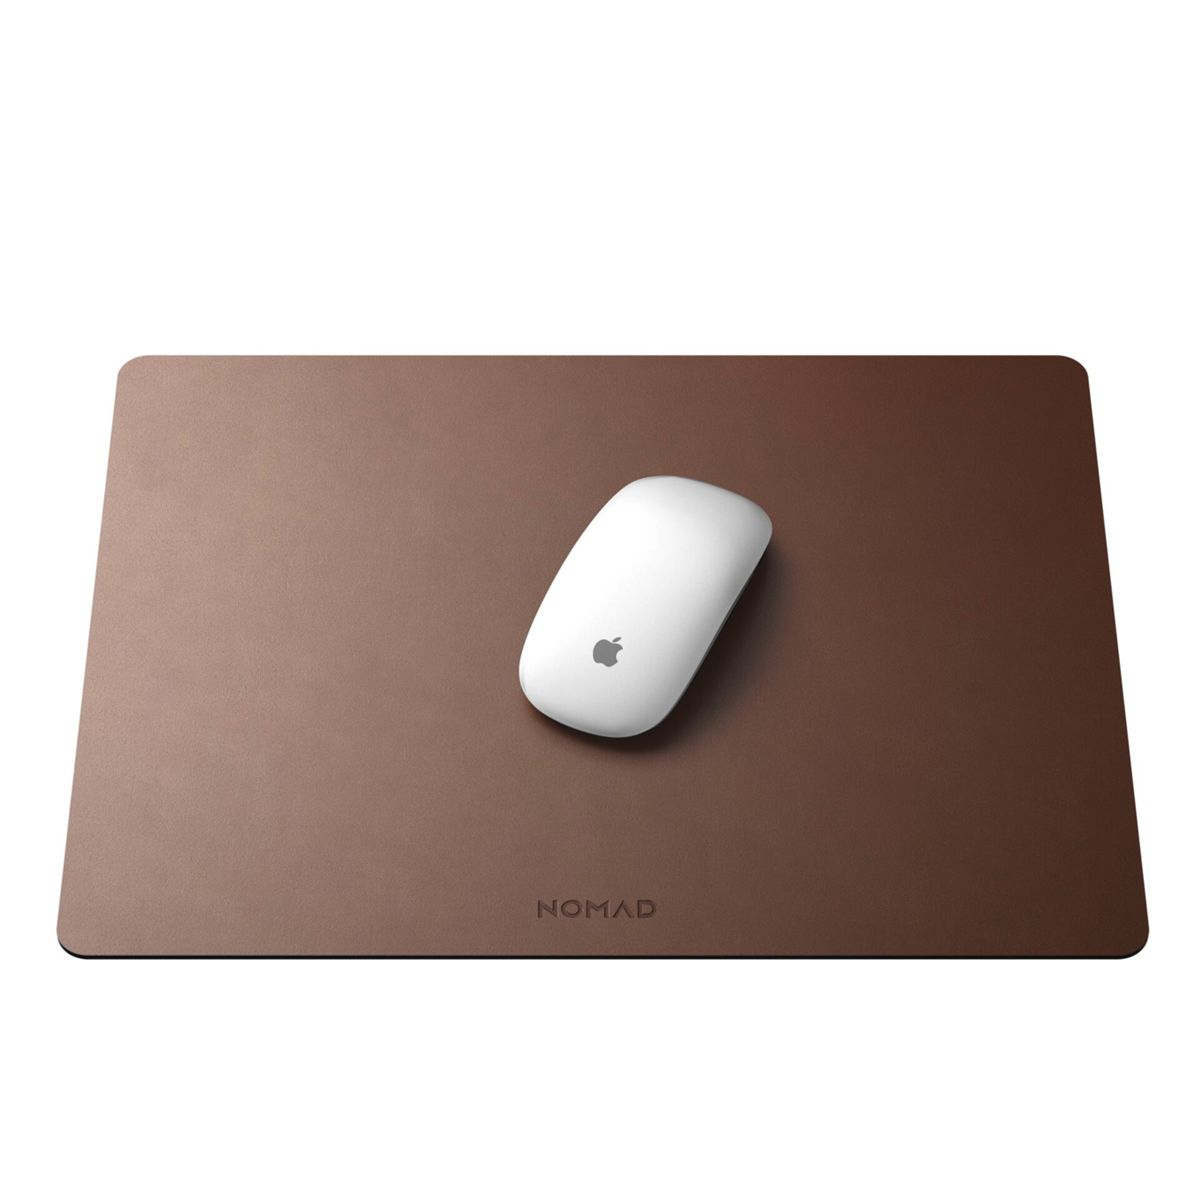 NOMAD Mousepad Rustic Brown Leather 16-Inch, Mauspad